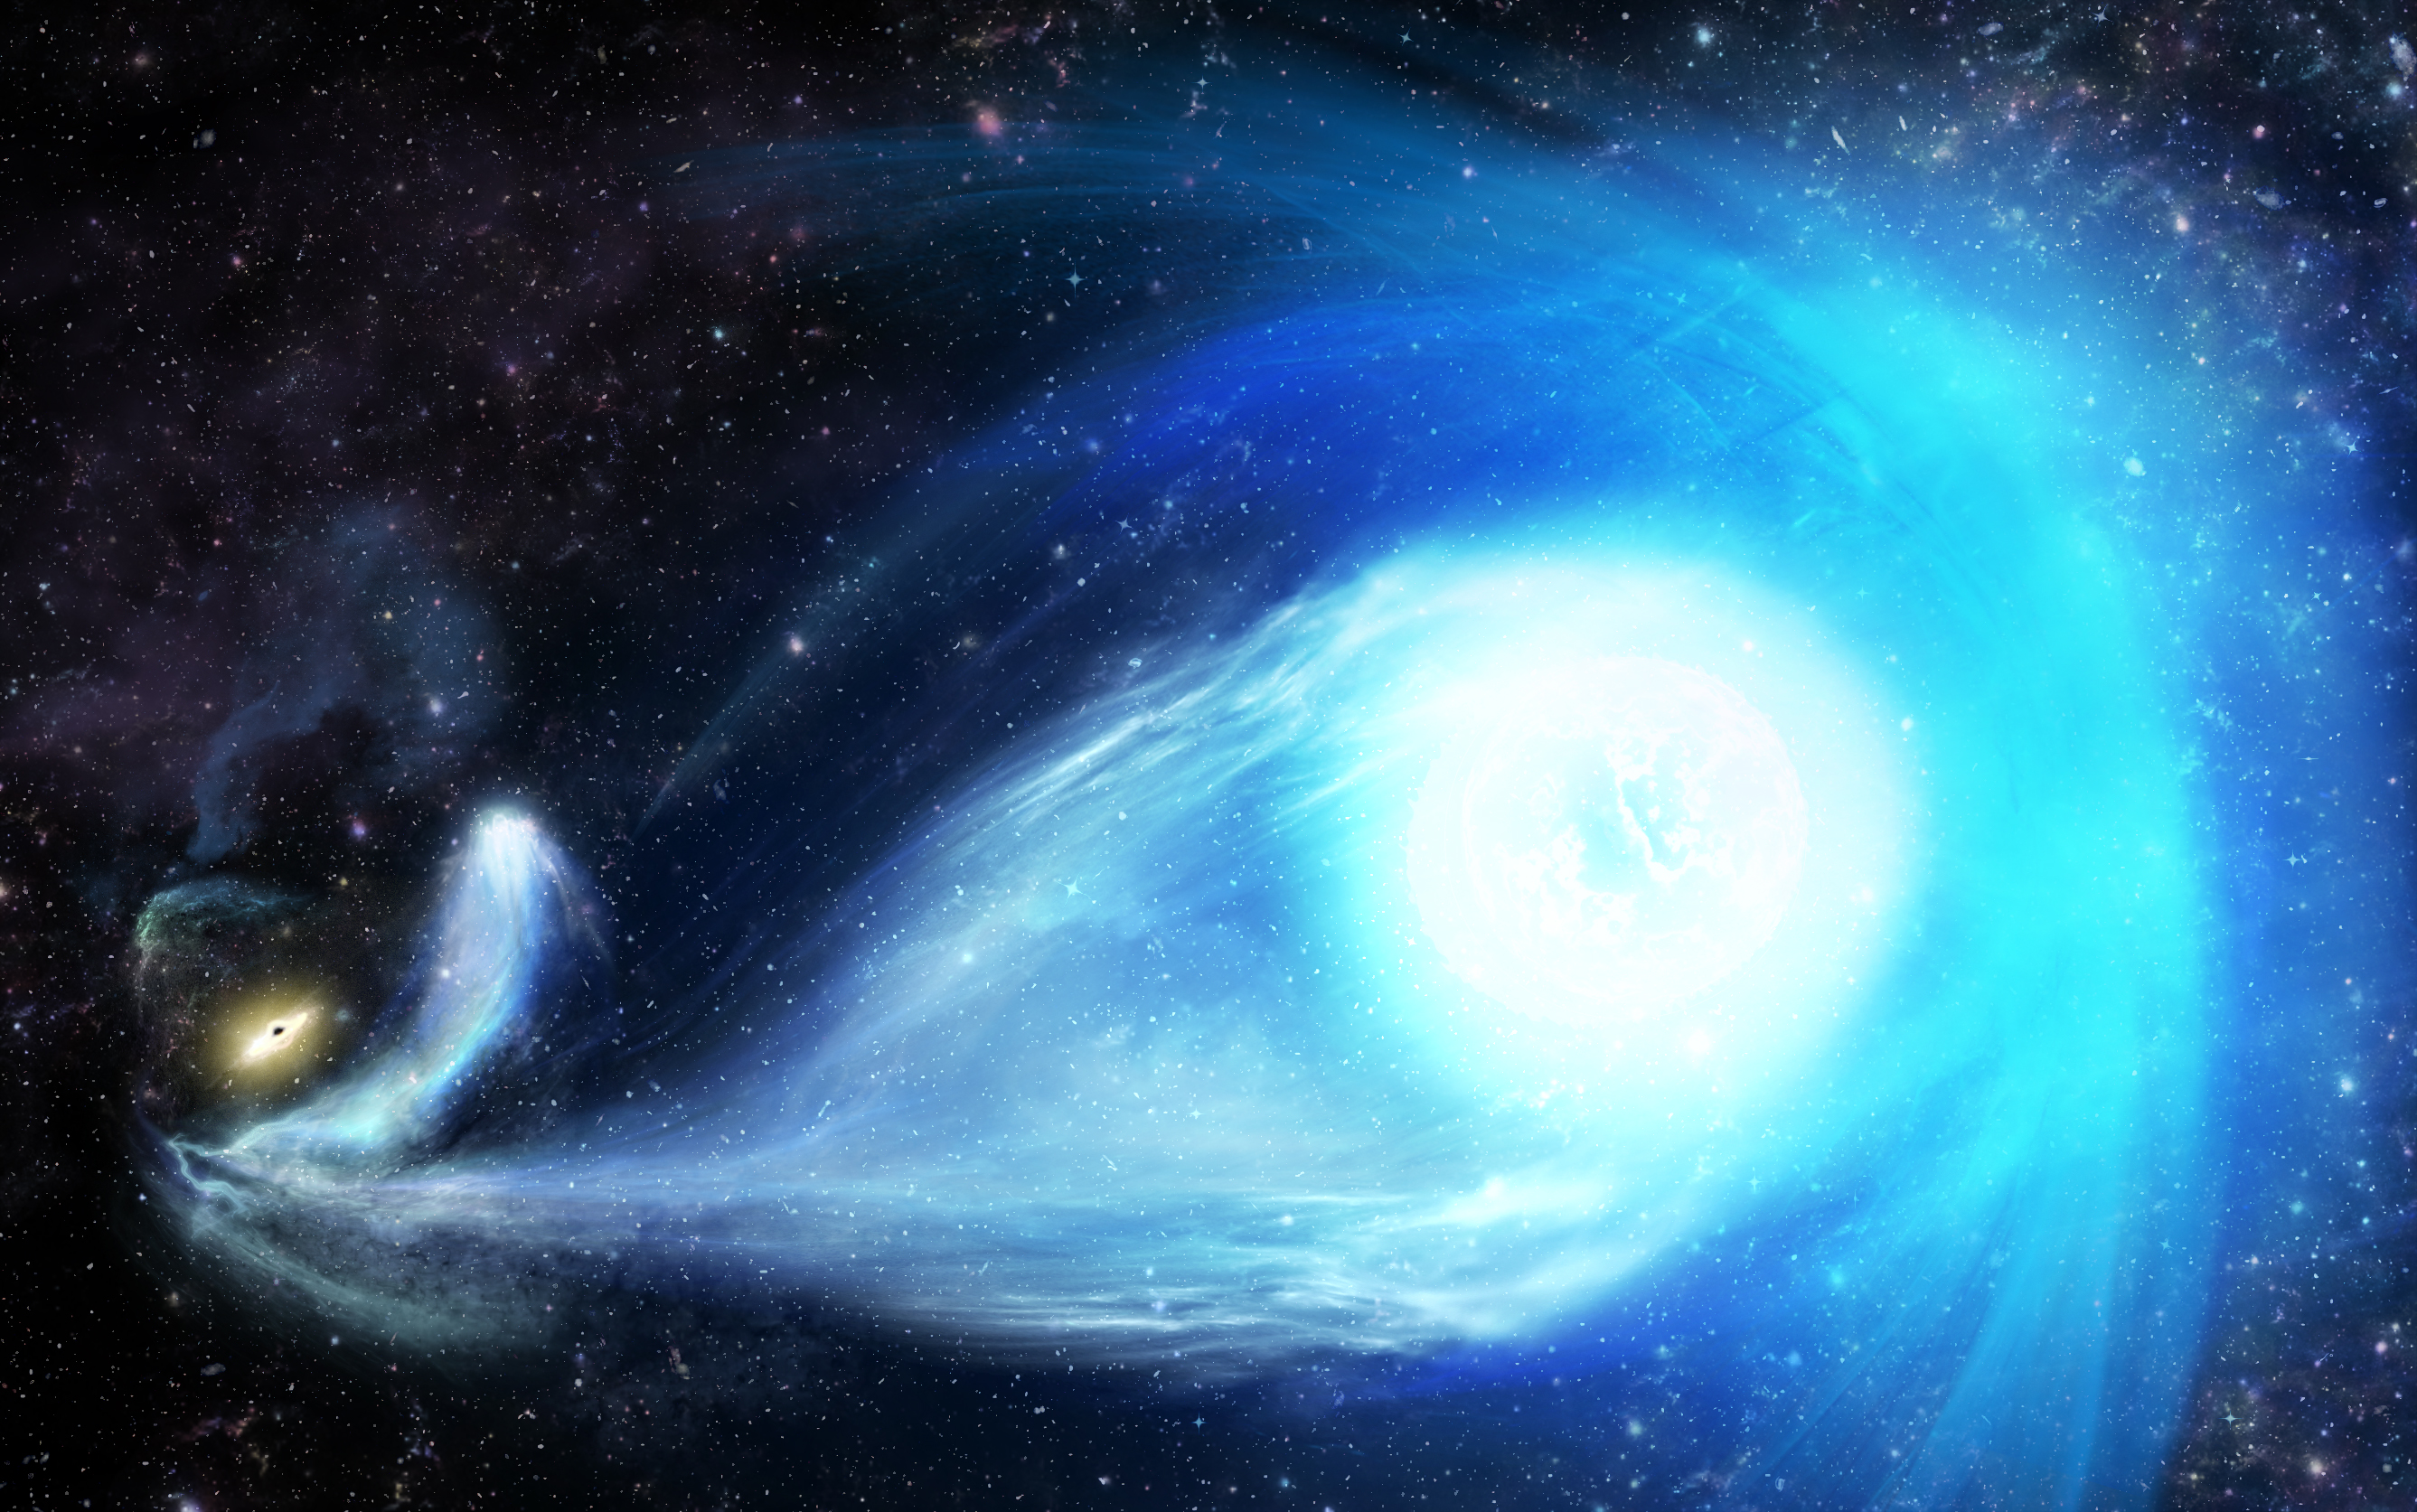 An artists impression of the ejection of S5-HVS1 from the centre of the galaxy